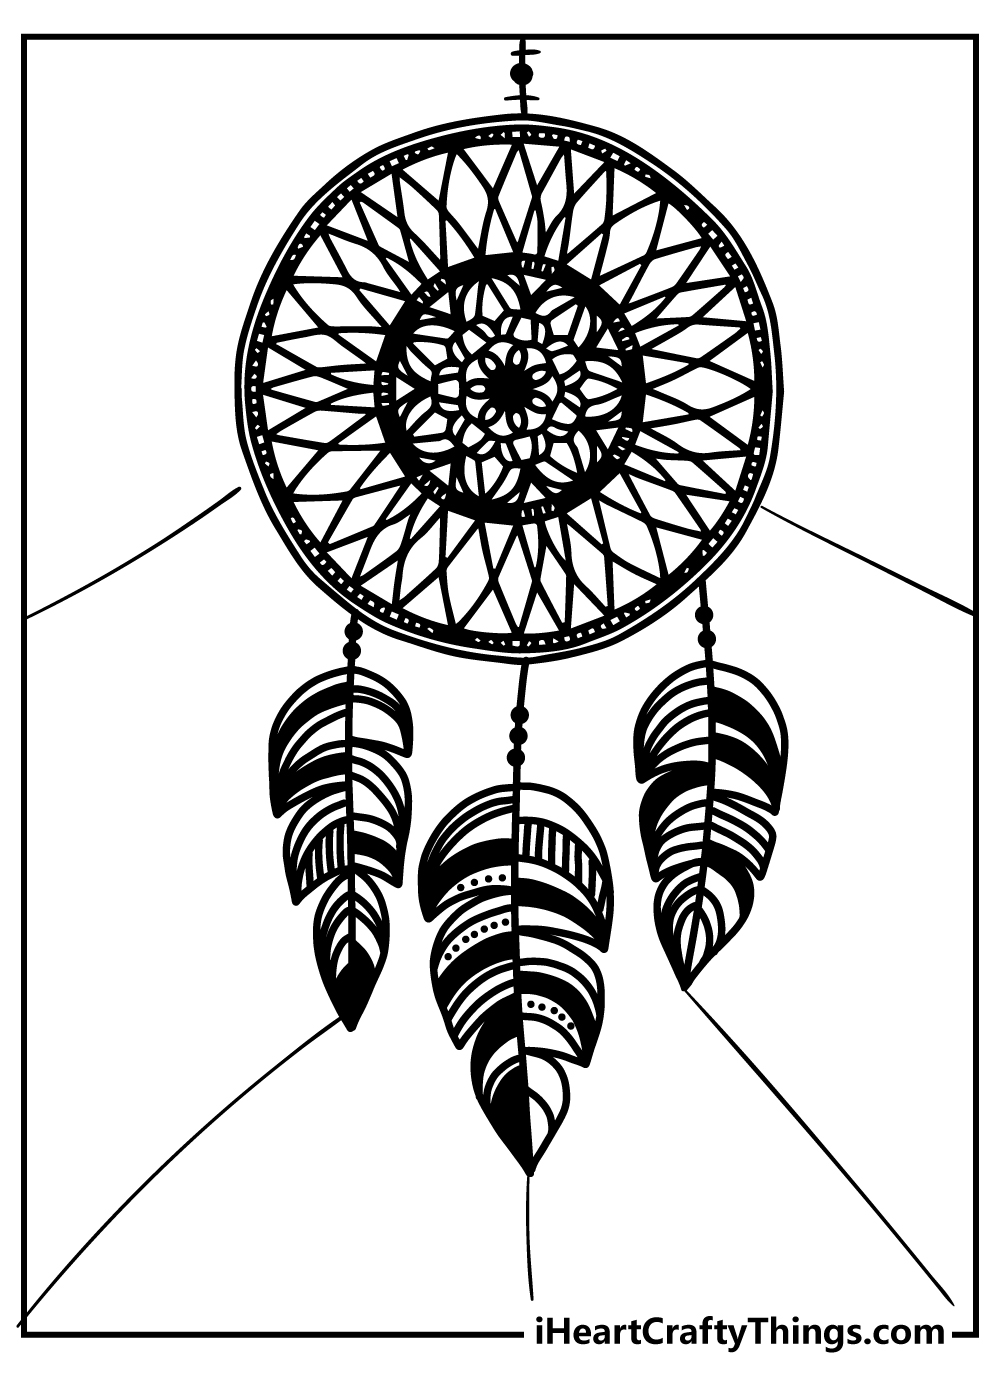 Dream Catcher Coloring Book for adults free download